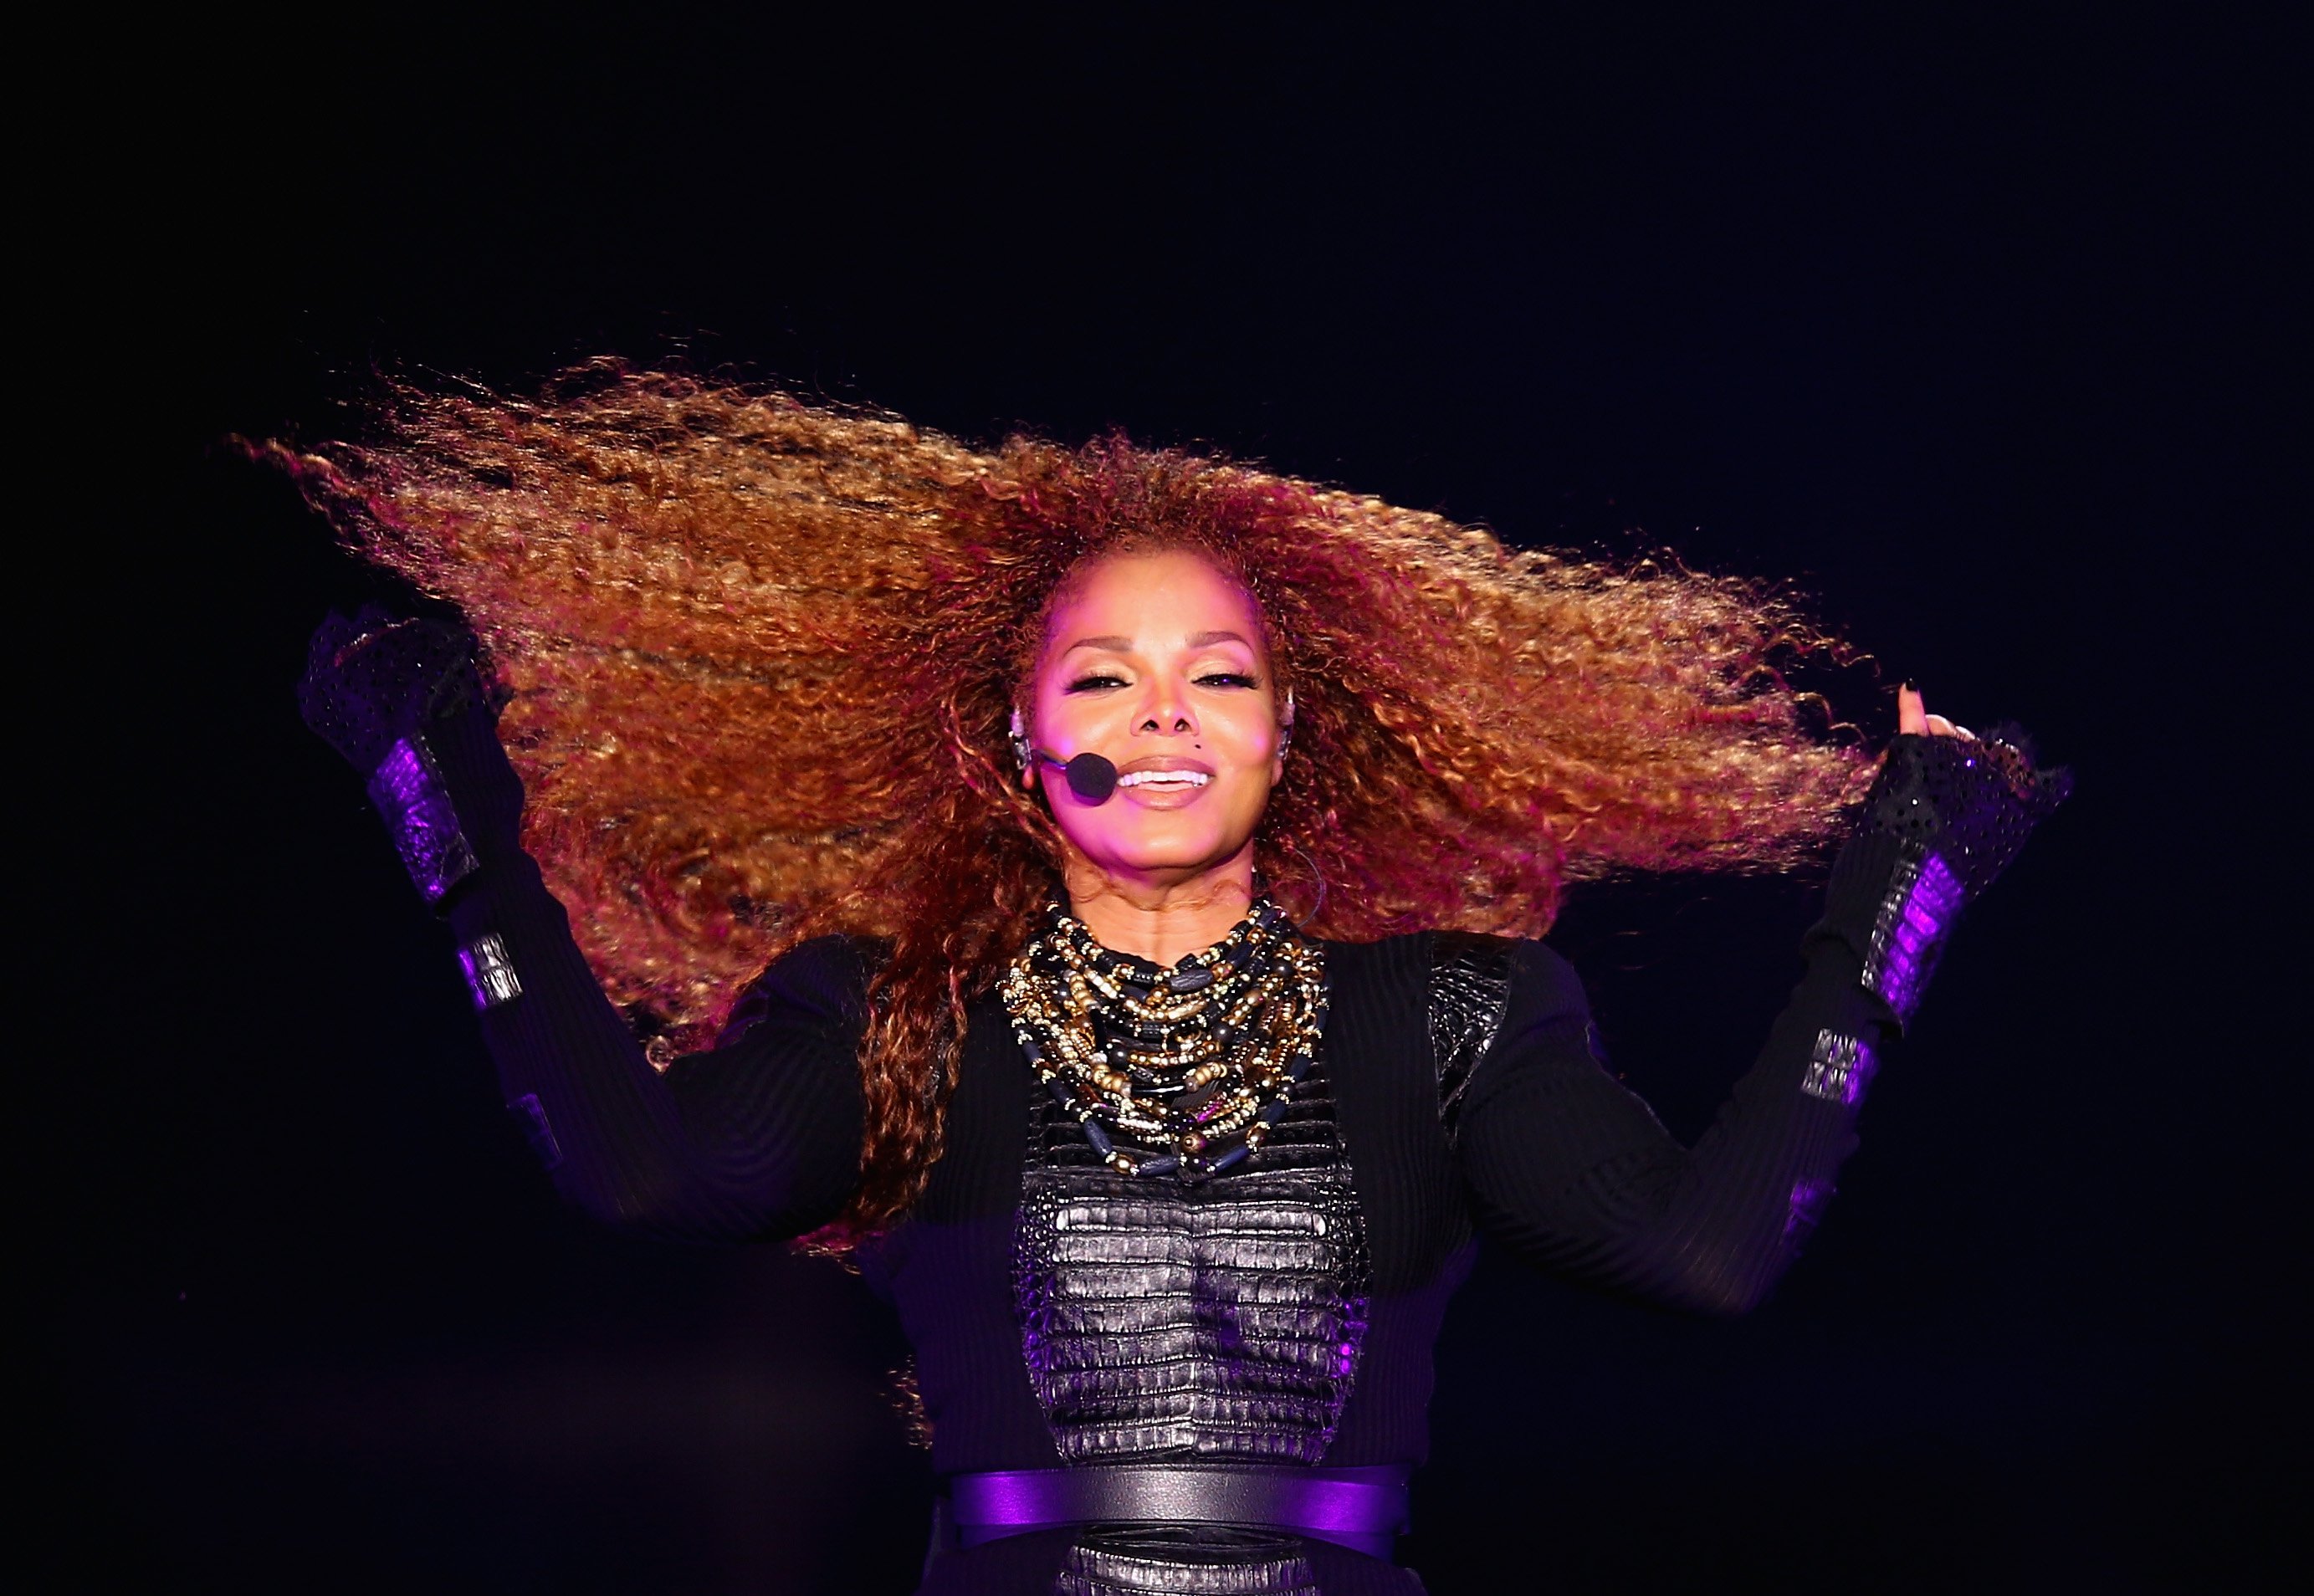 Janet Jackson performs after the Dubai World Cup at the Meydan Racecourse on March 26, 2016 | Photo: Getty Images